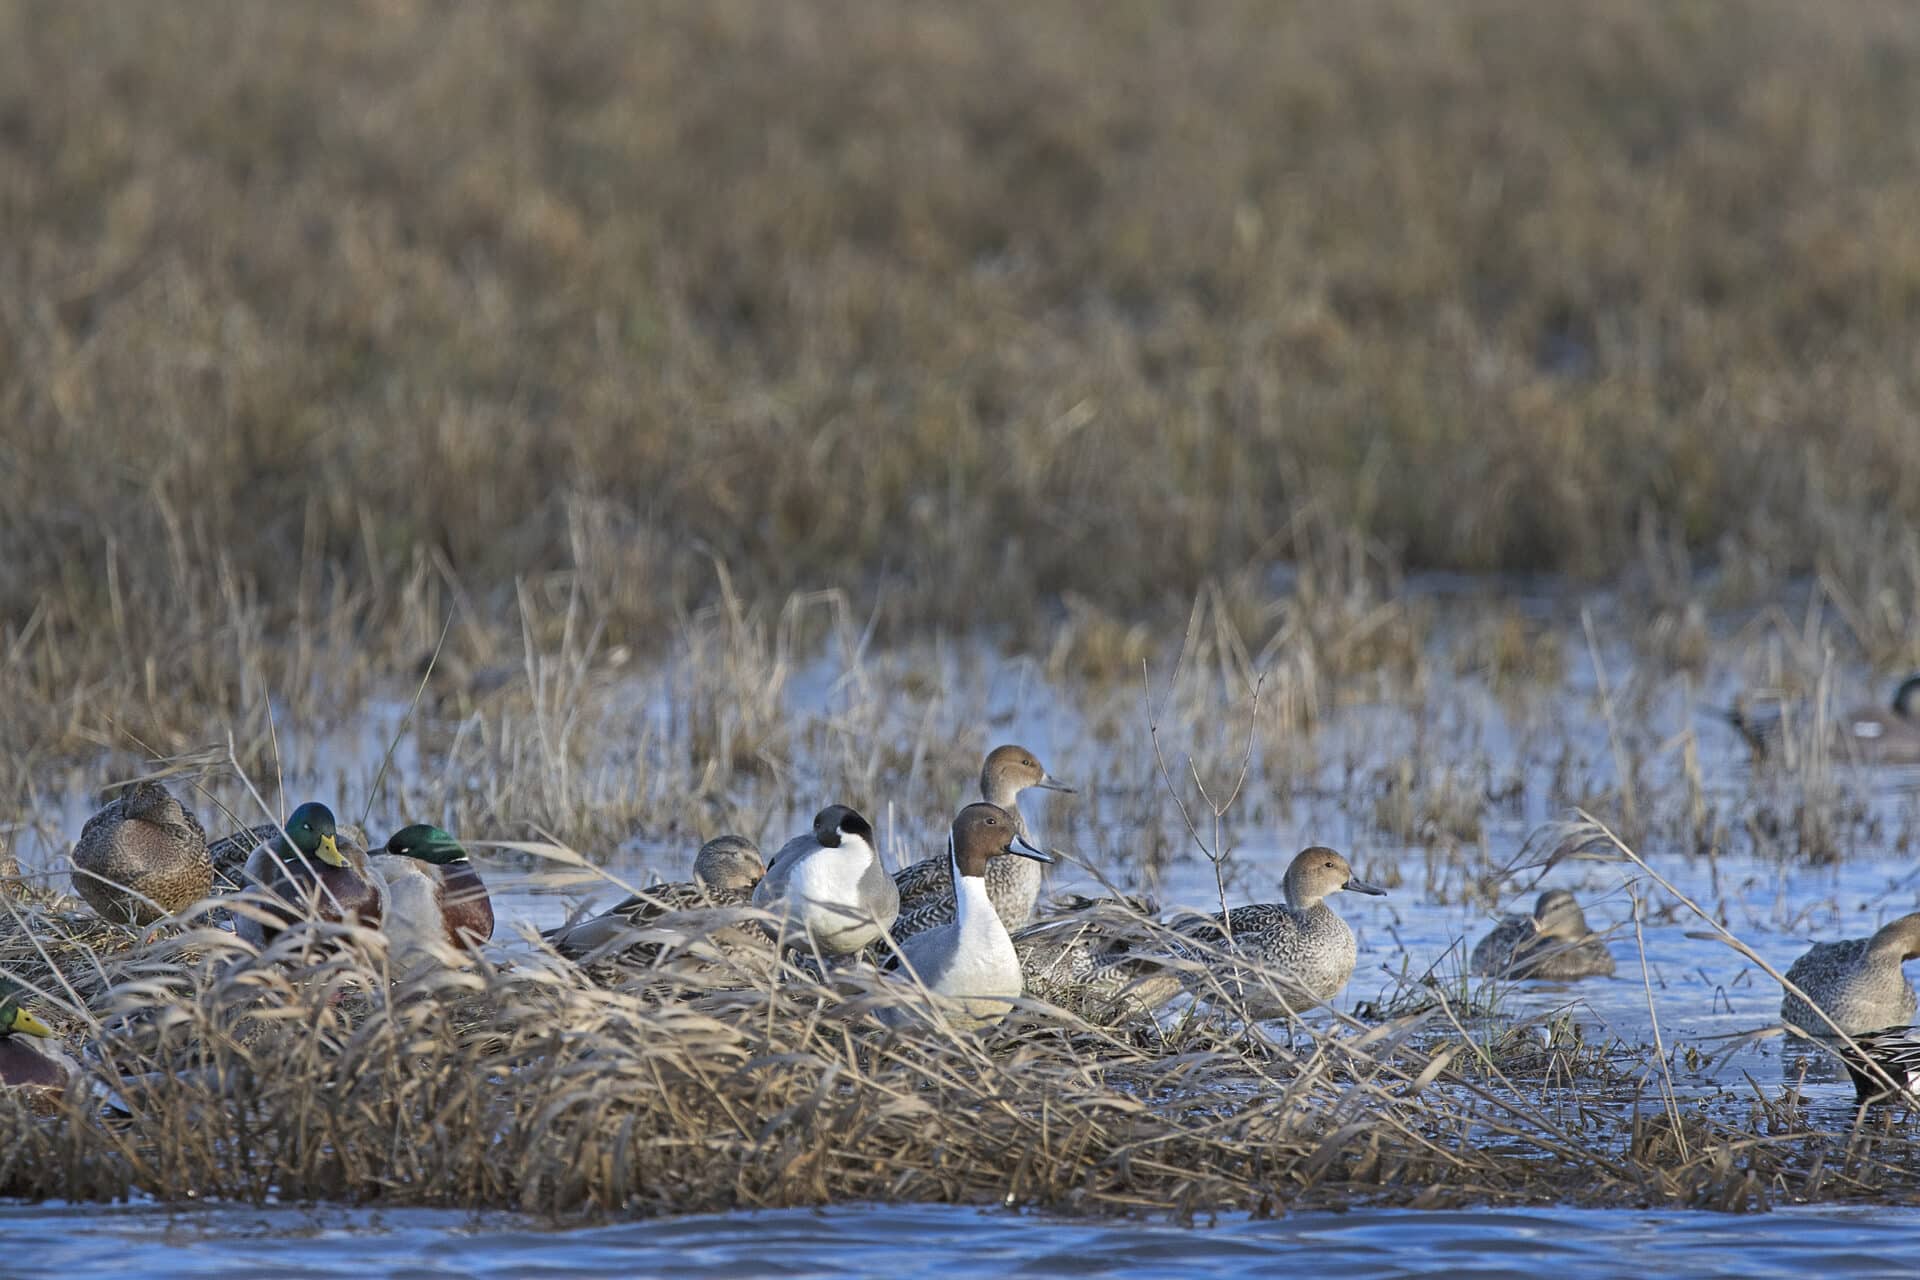 Mixed waterfowl